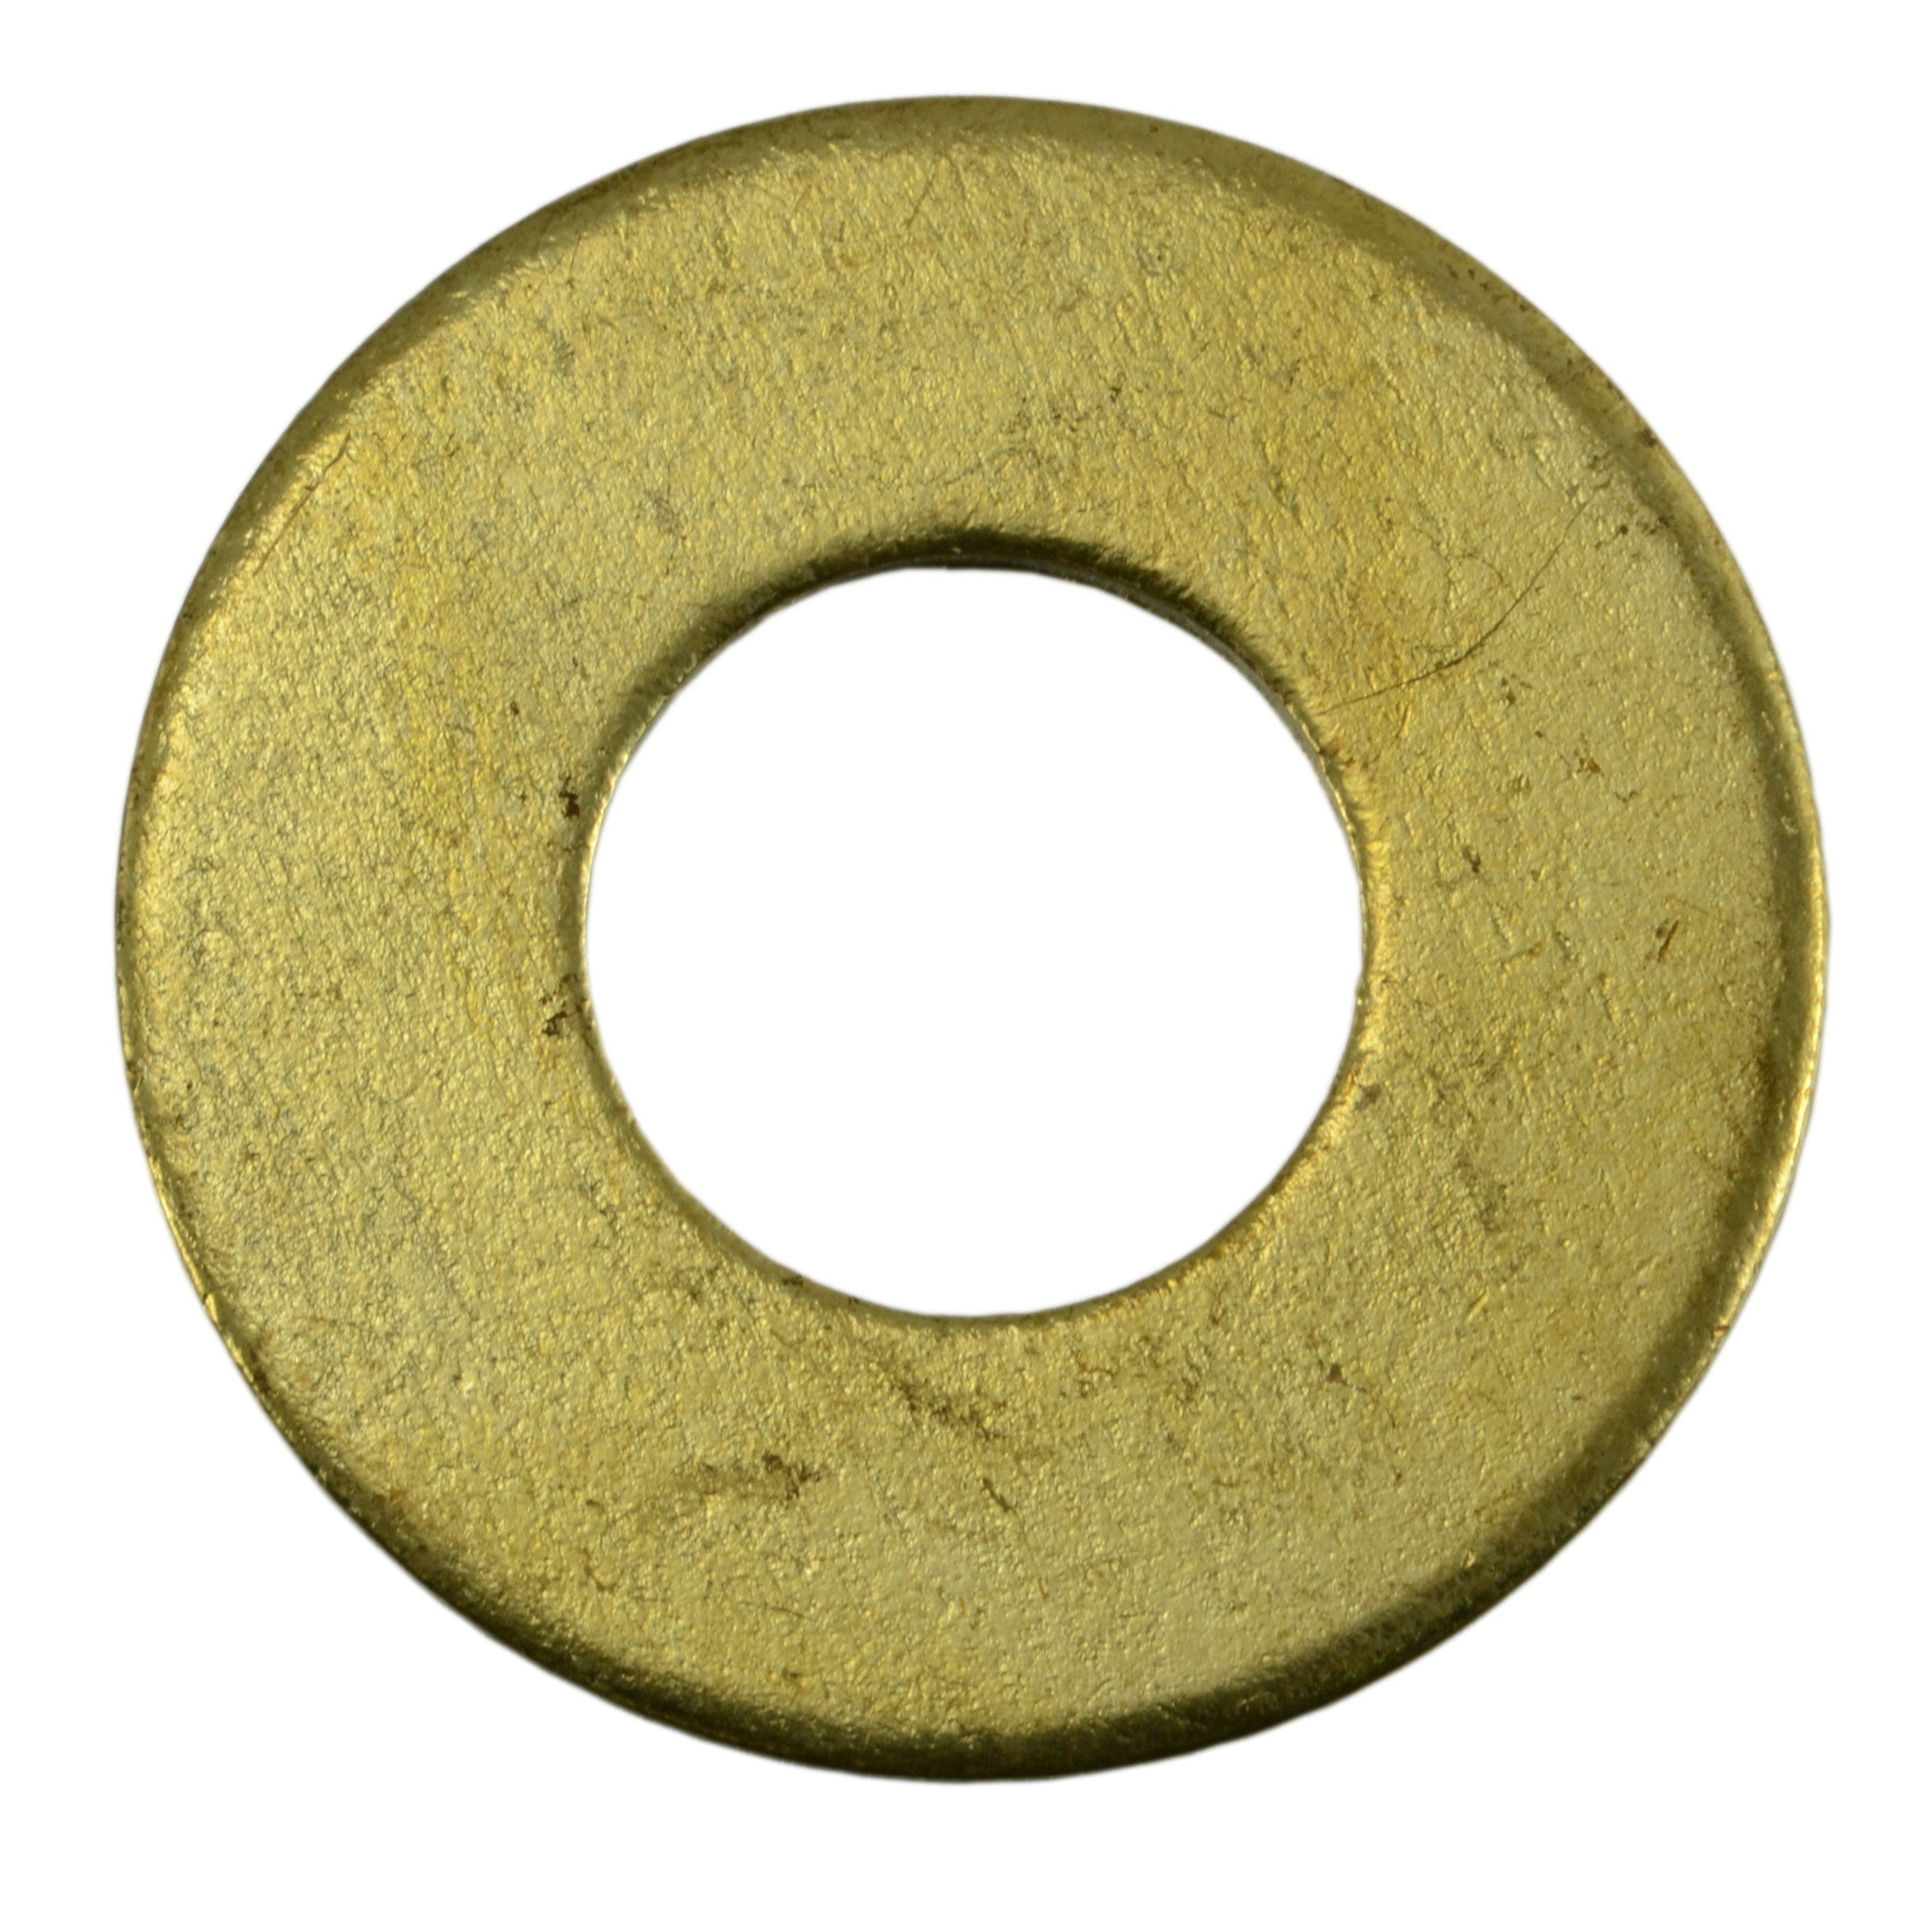 3/4 Inch Grade 8 USS Flat Washers 25 Pieces 25 